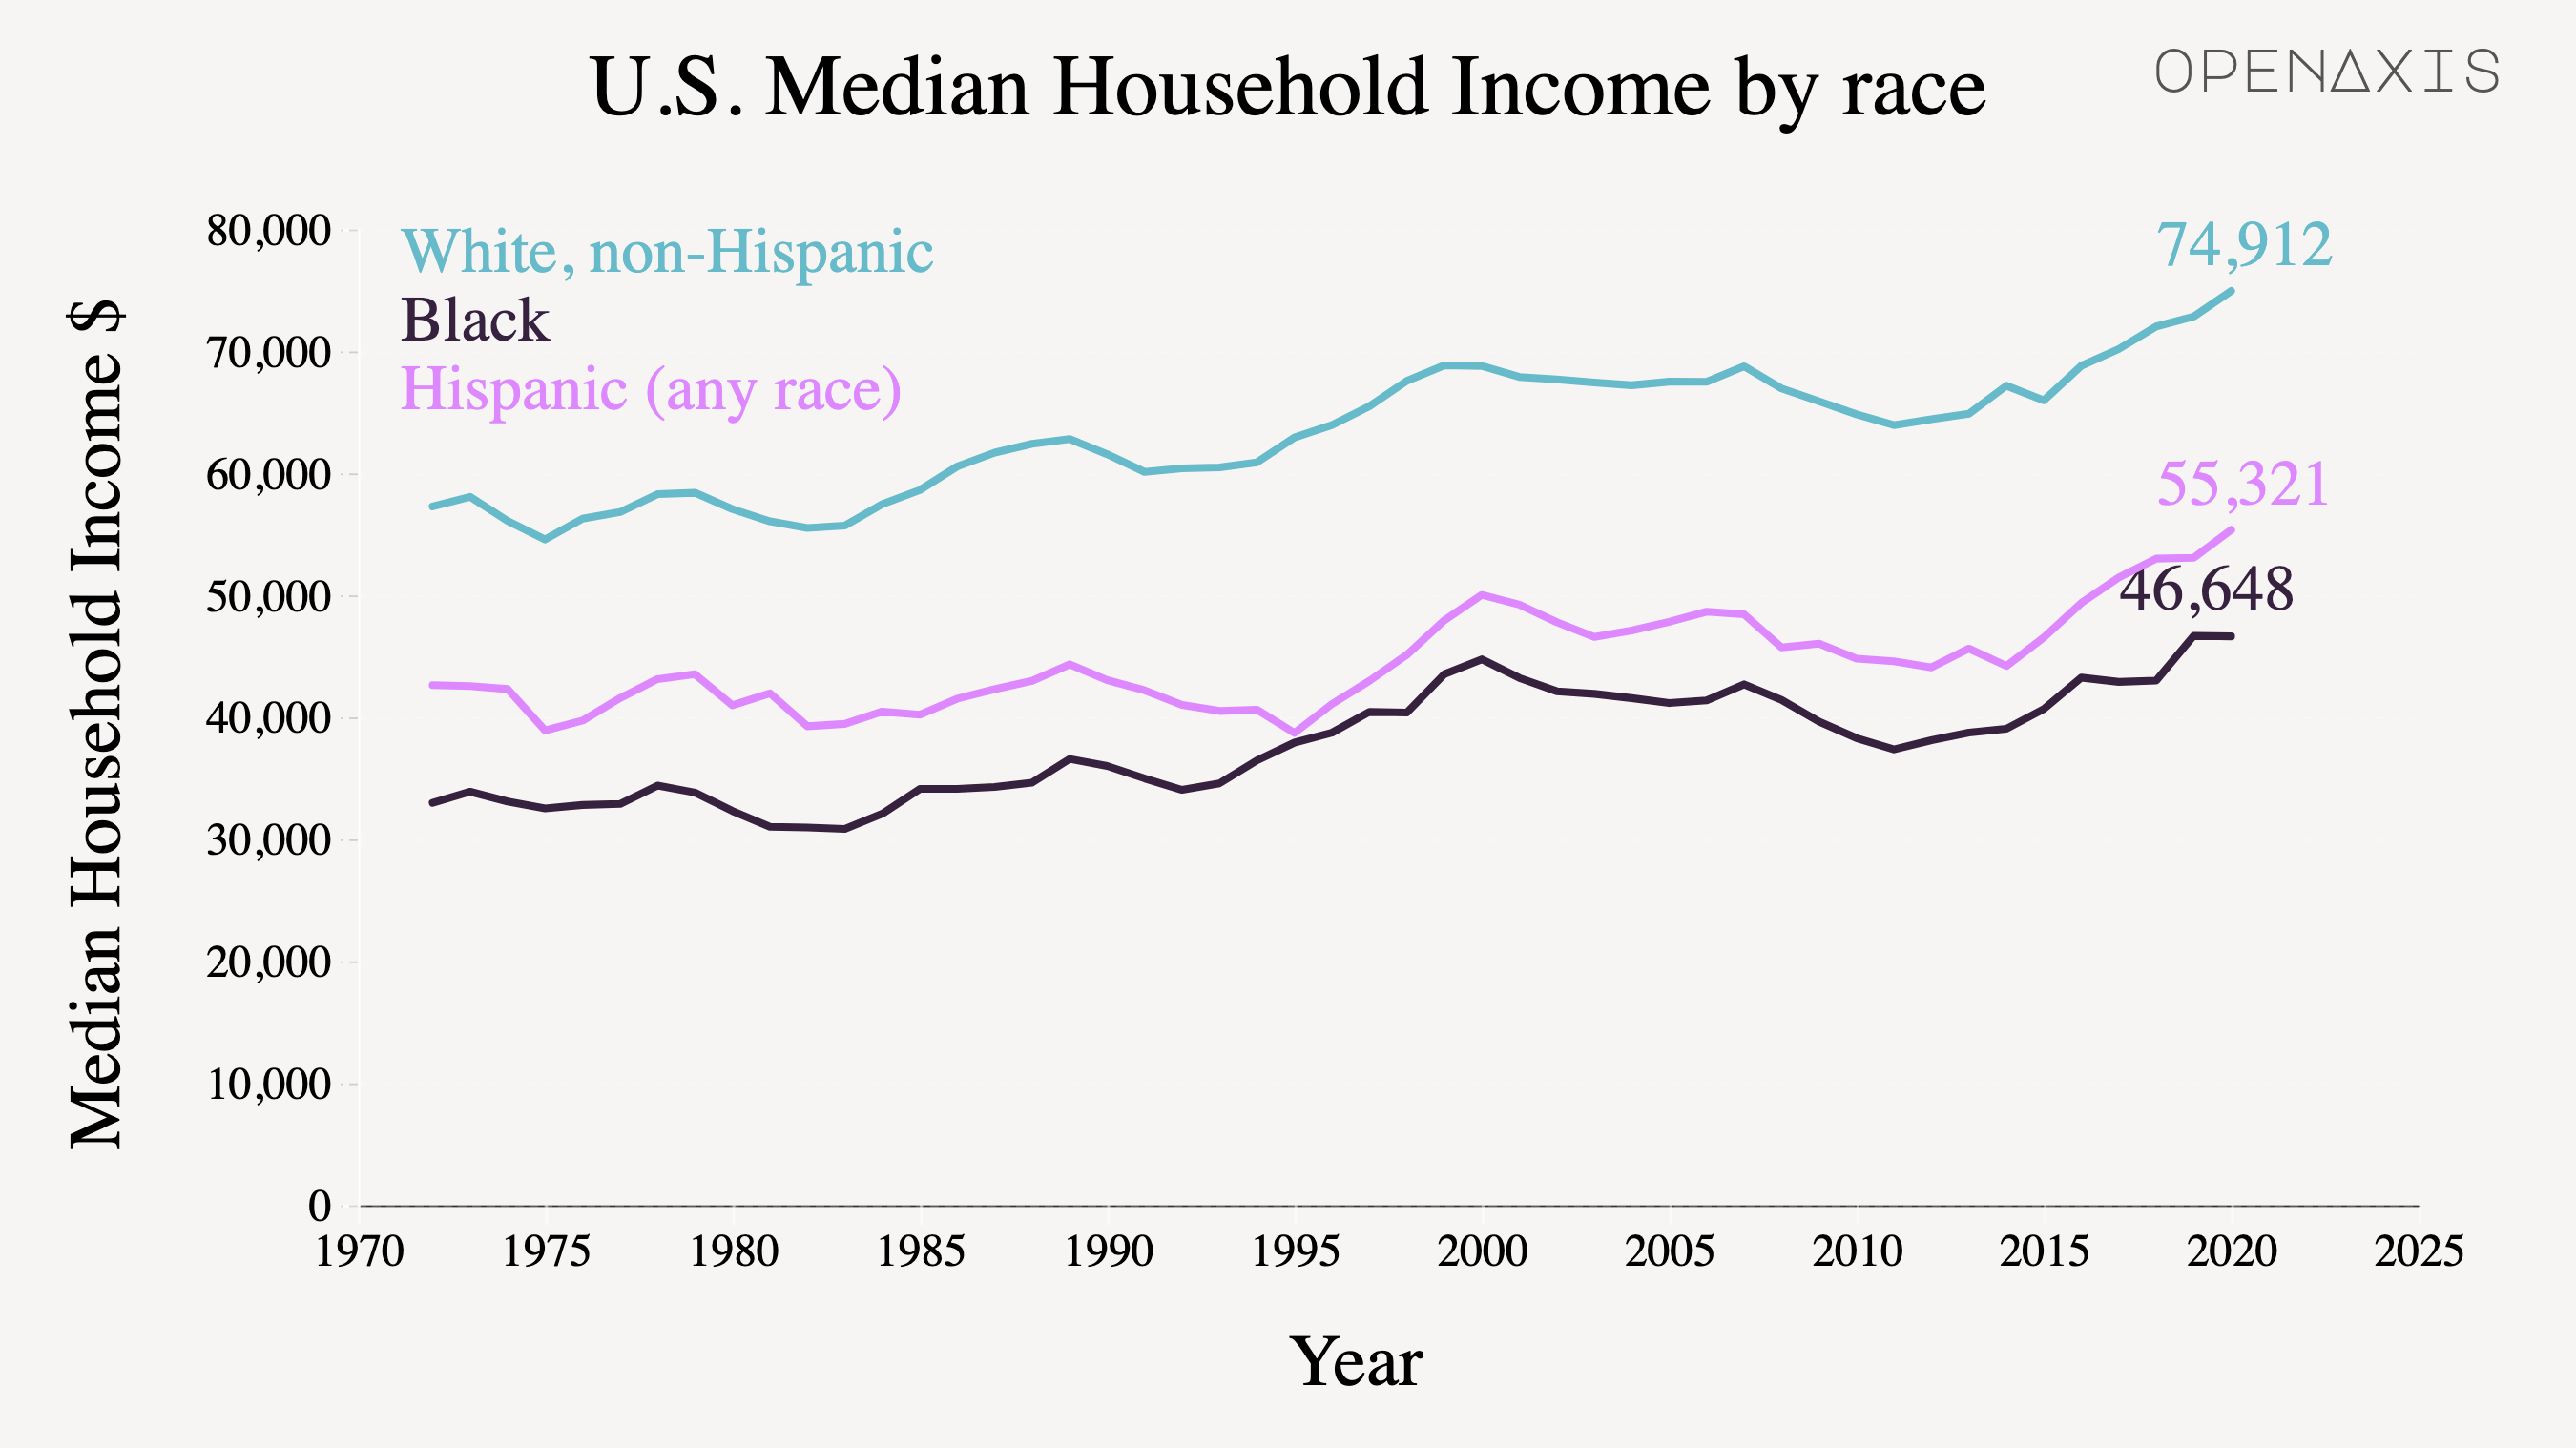 "U.S. Median Household Income by race "